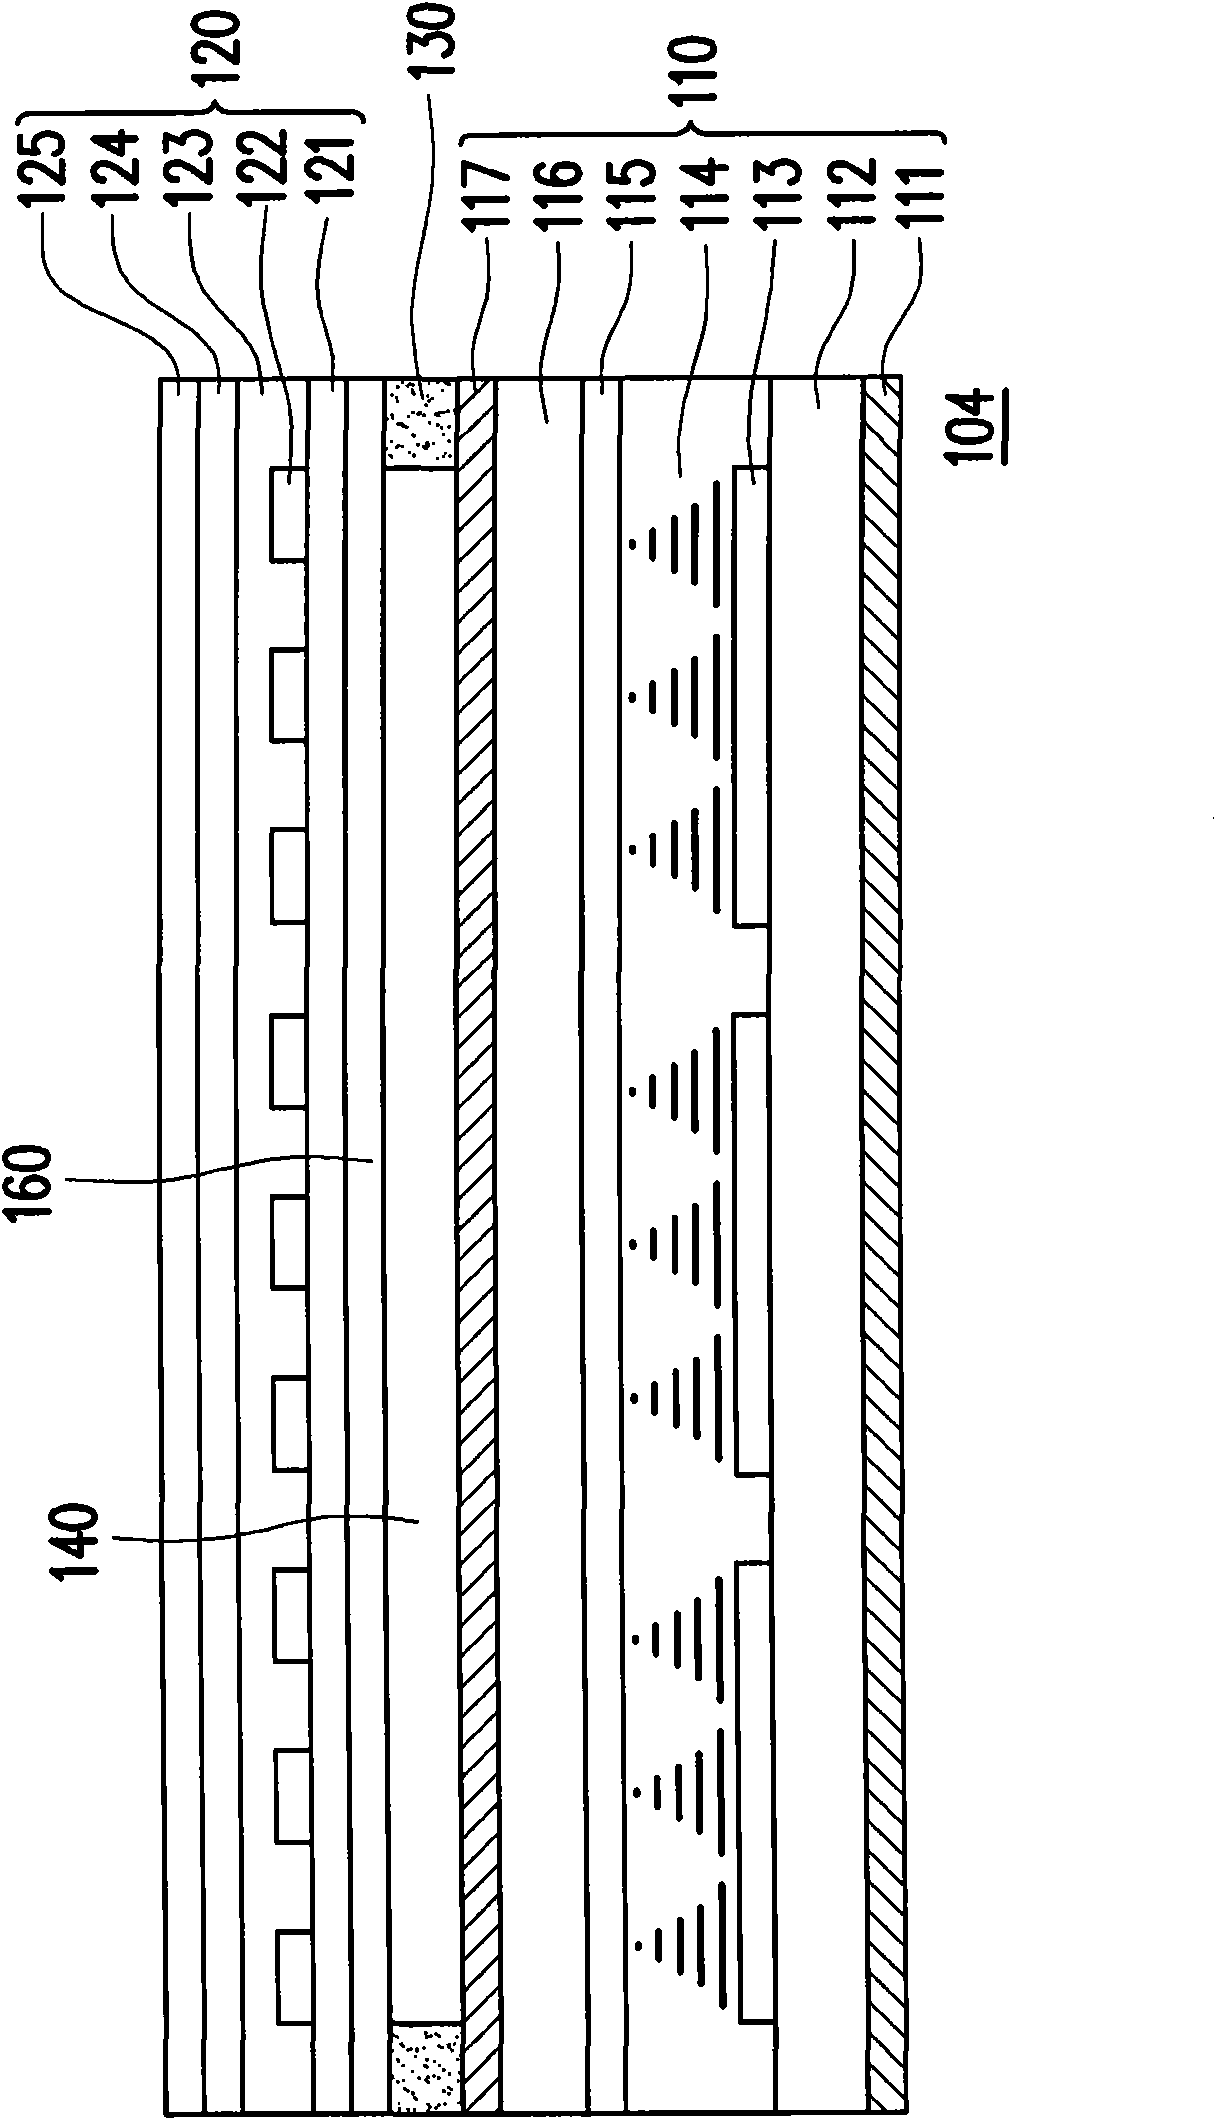 Touch-control display device, touch-control liquid crystal display device and manufacturing method thereof